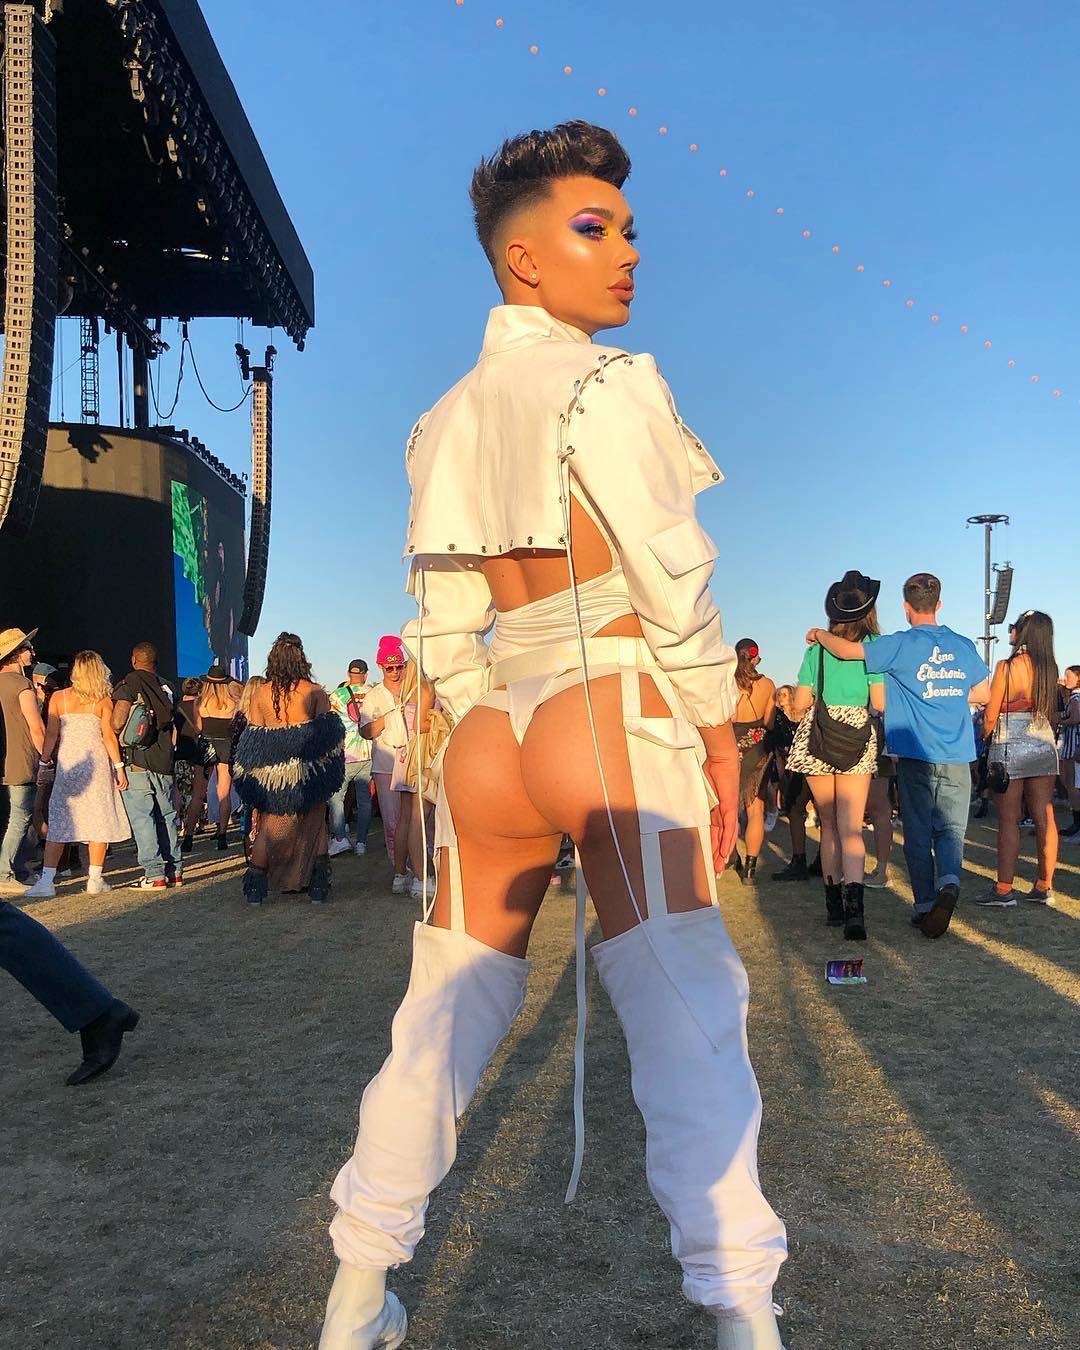 adrian fredrick recommends James Charles Butt